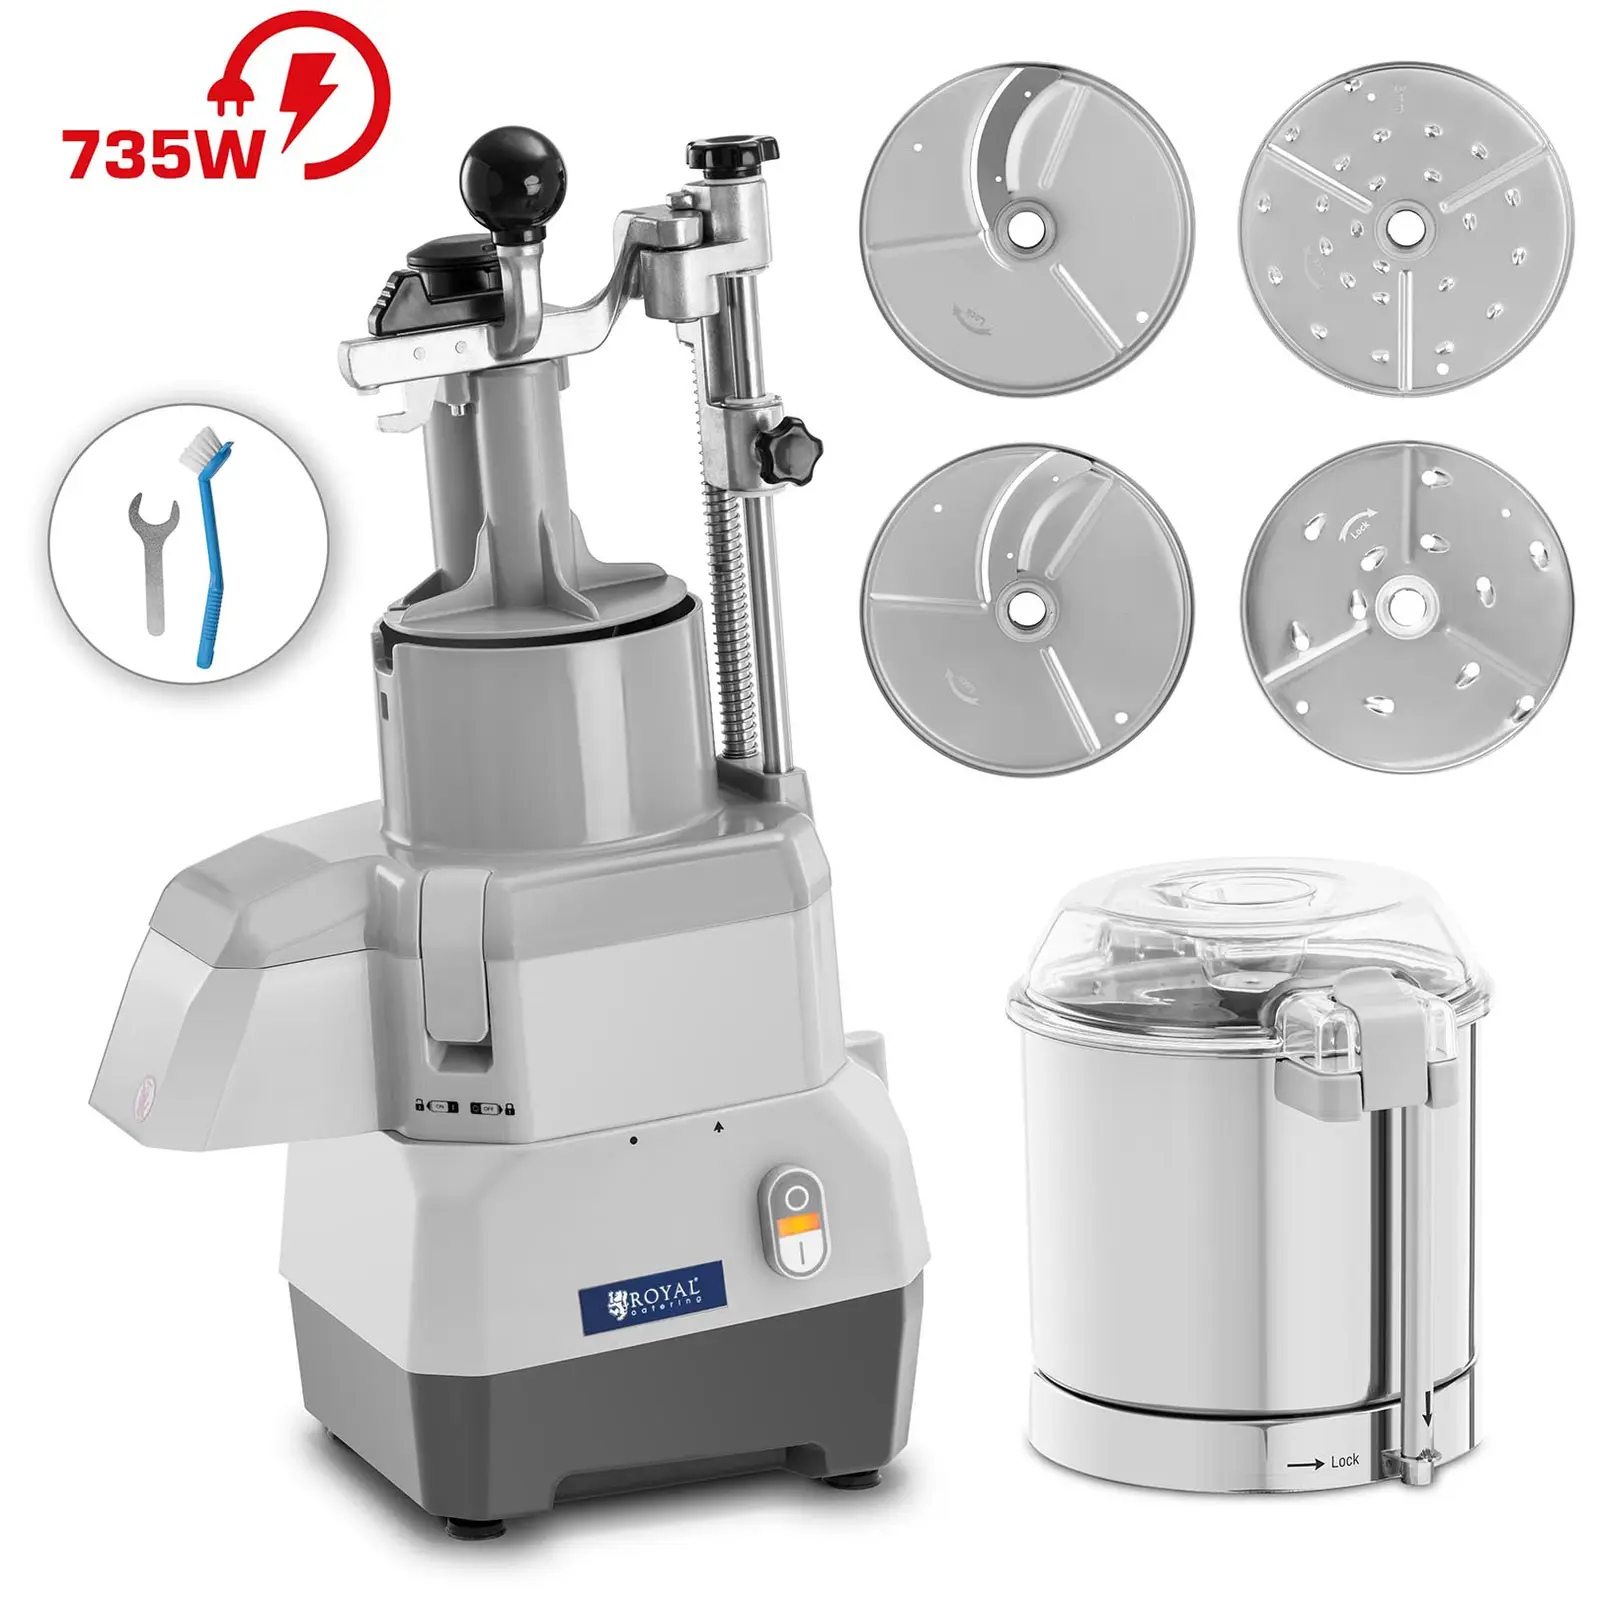 Electric Vegetable Slicer electric plus Food Processor 5 l - 735 W - 4 cutting discs - Ø 174 mm - Royal Catering